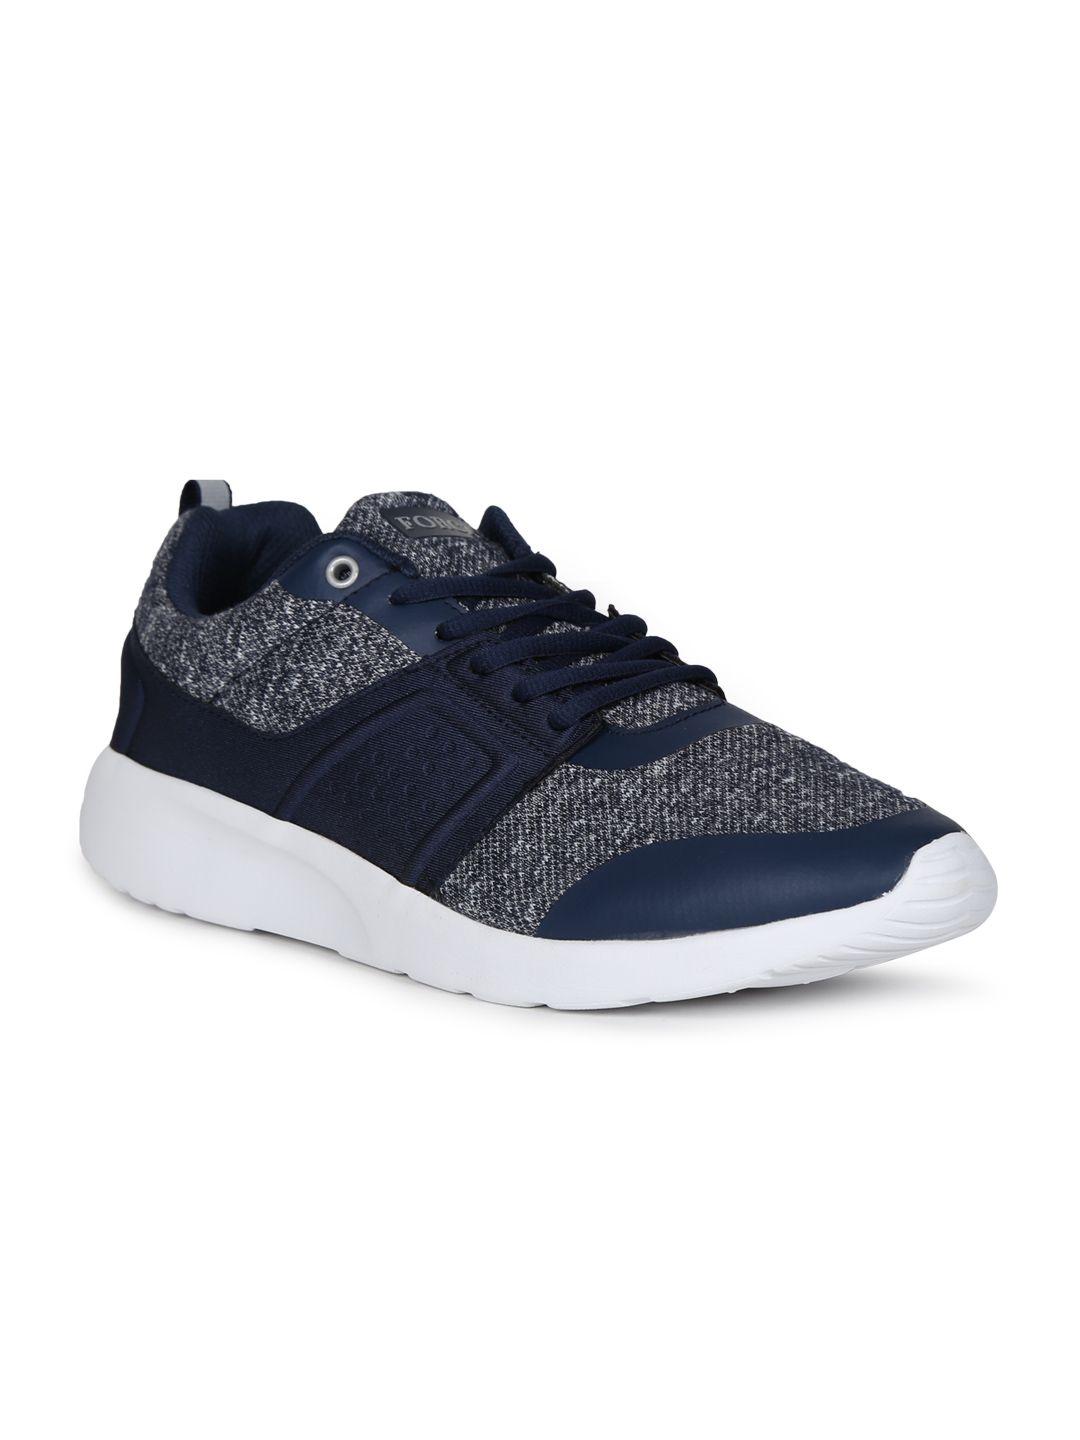 forca by lifestyle men navy blue & grey sneakers